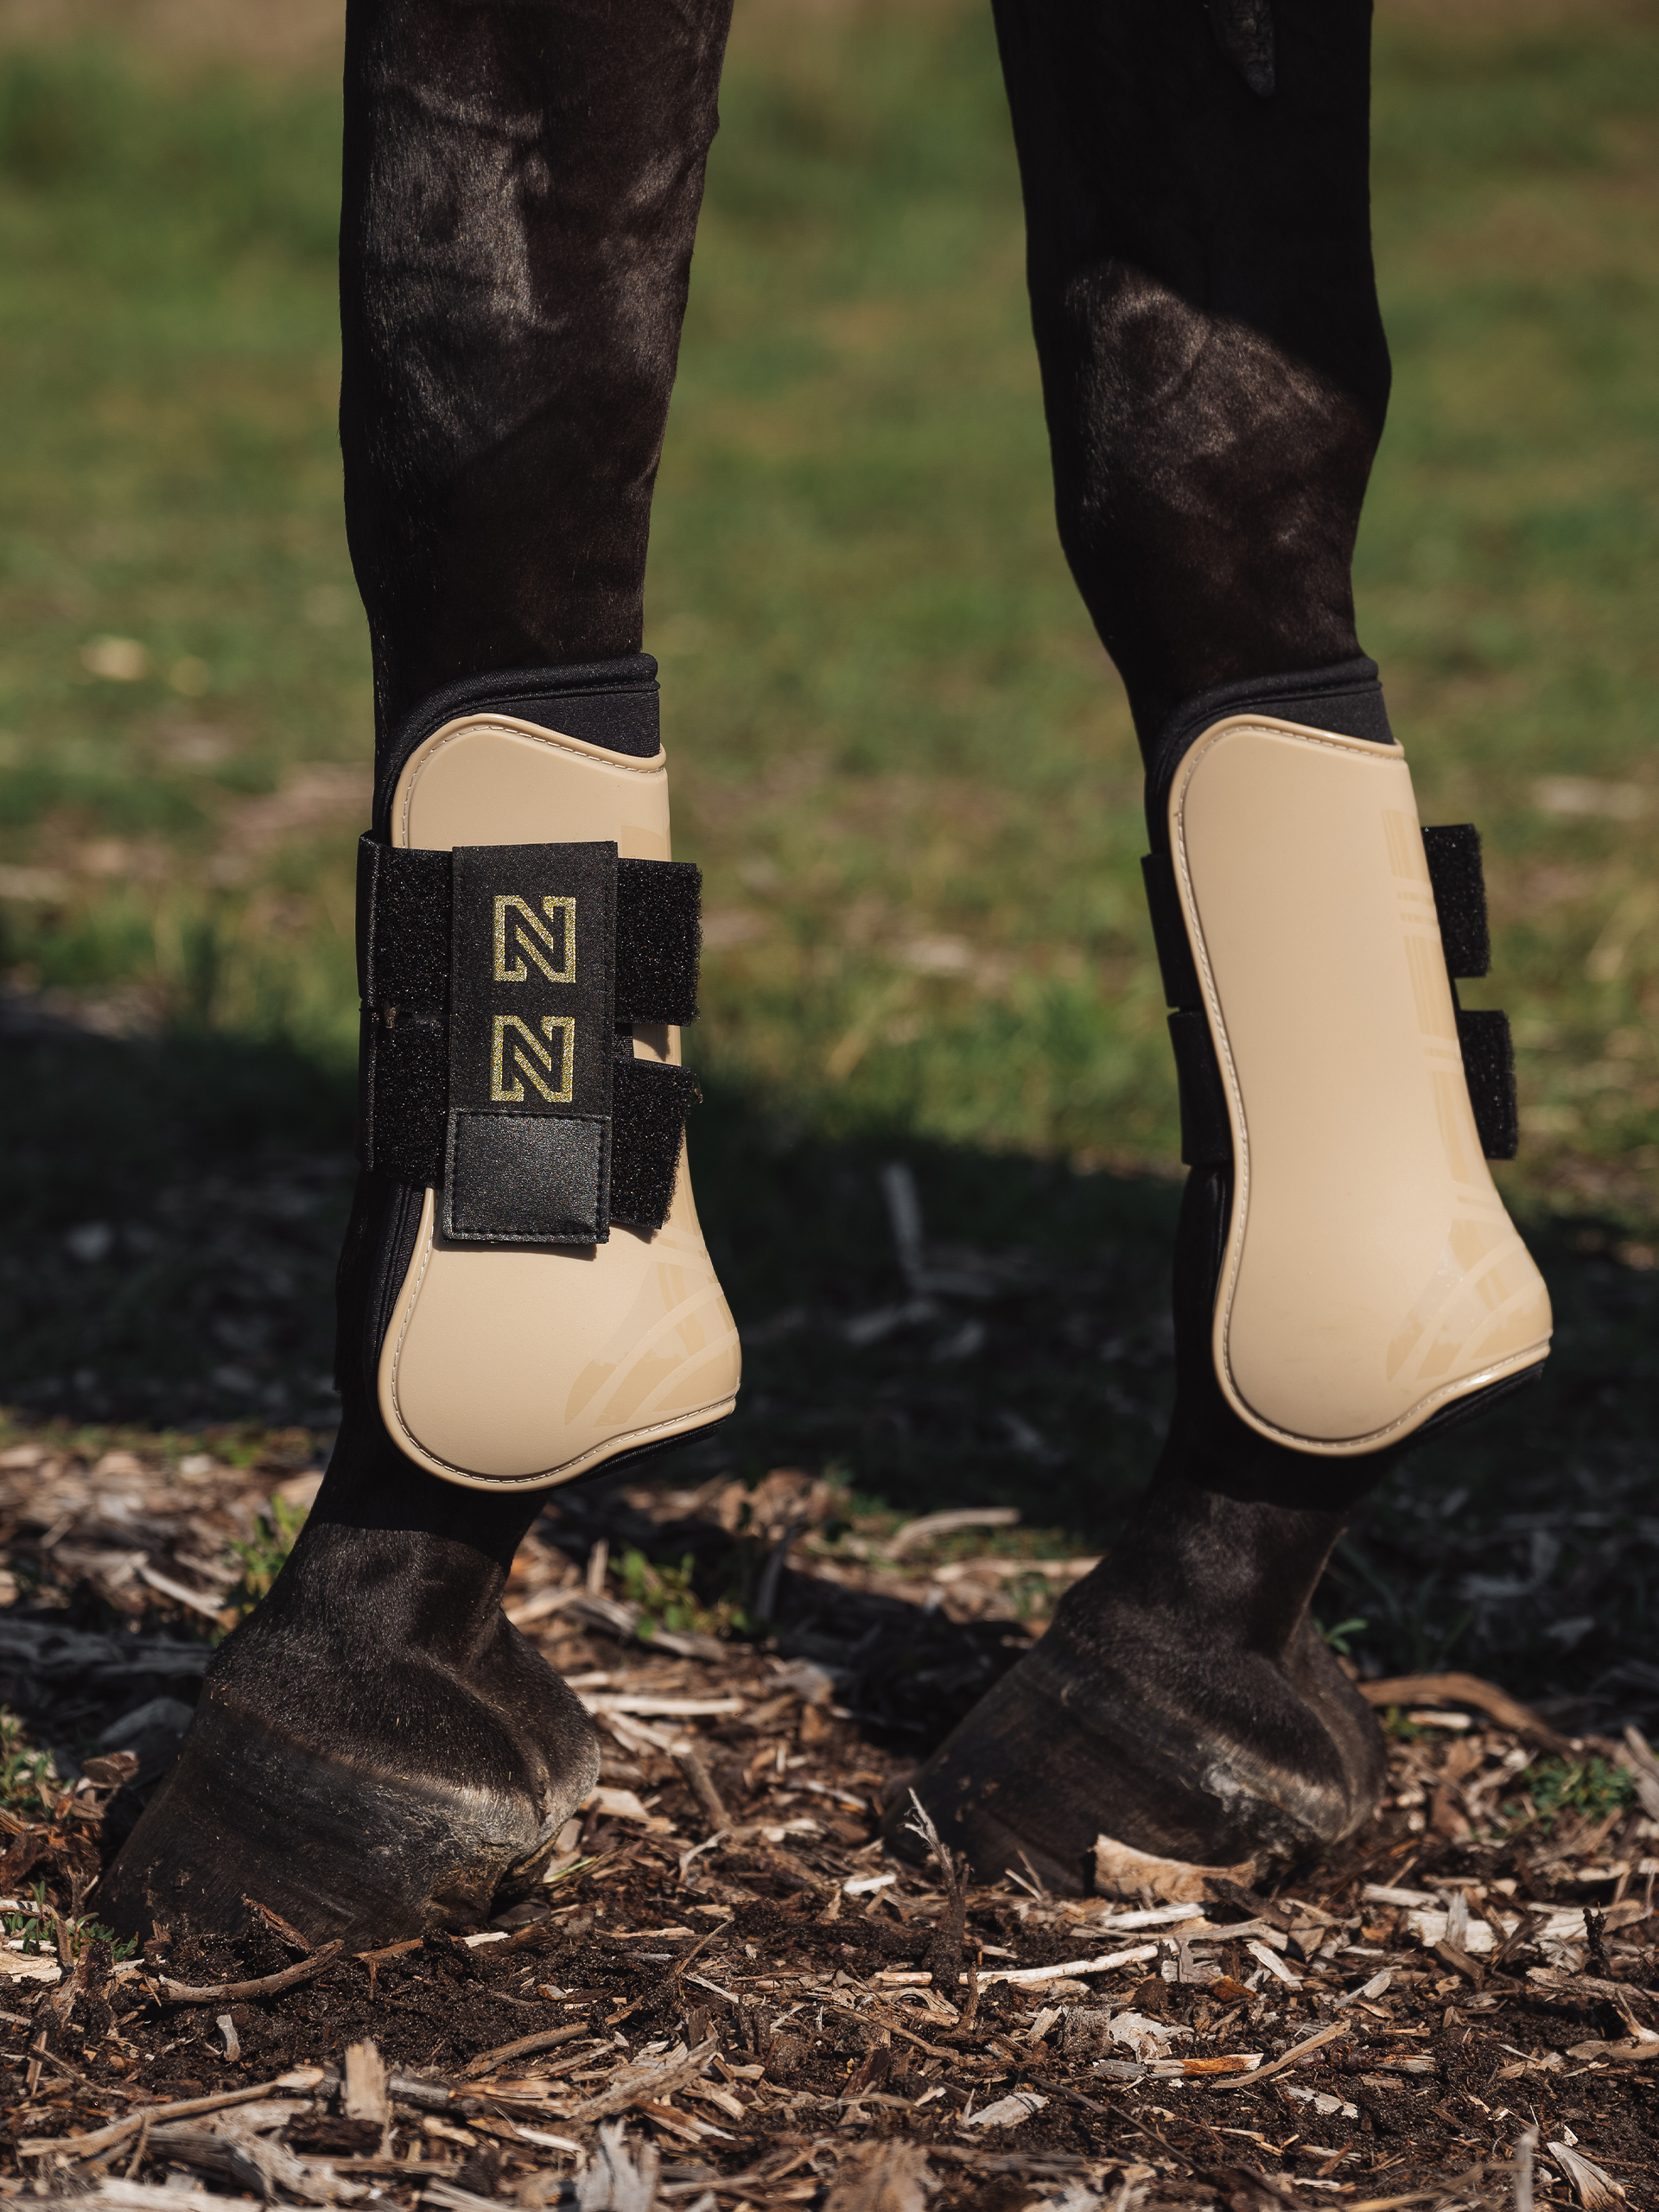 Tendon Boots with N logo